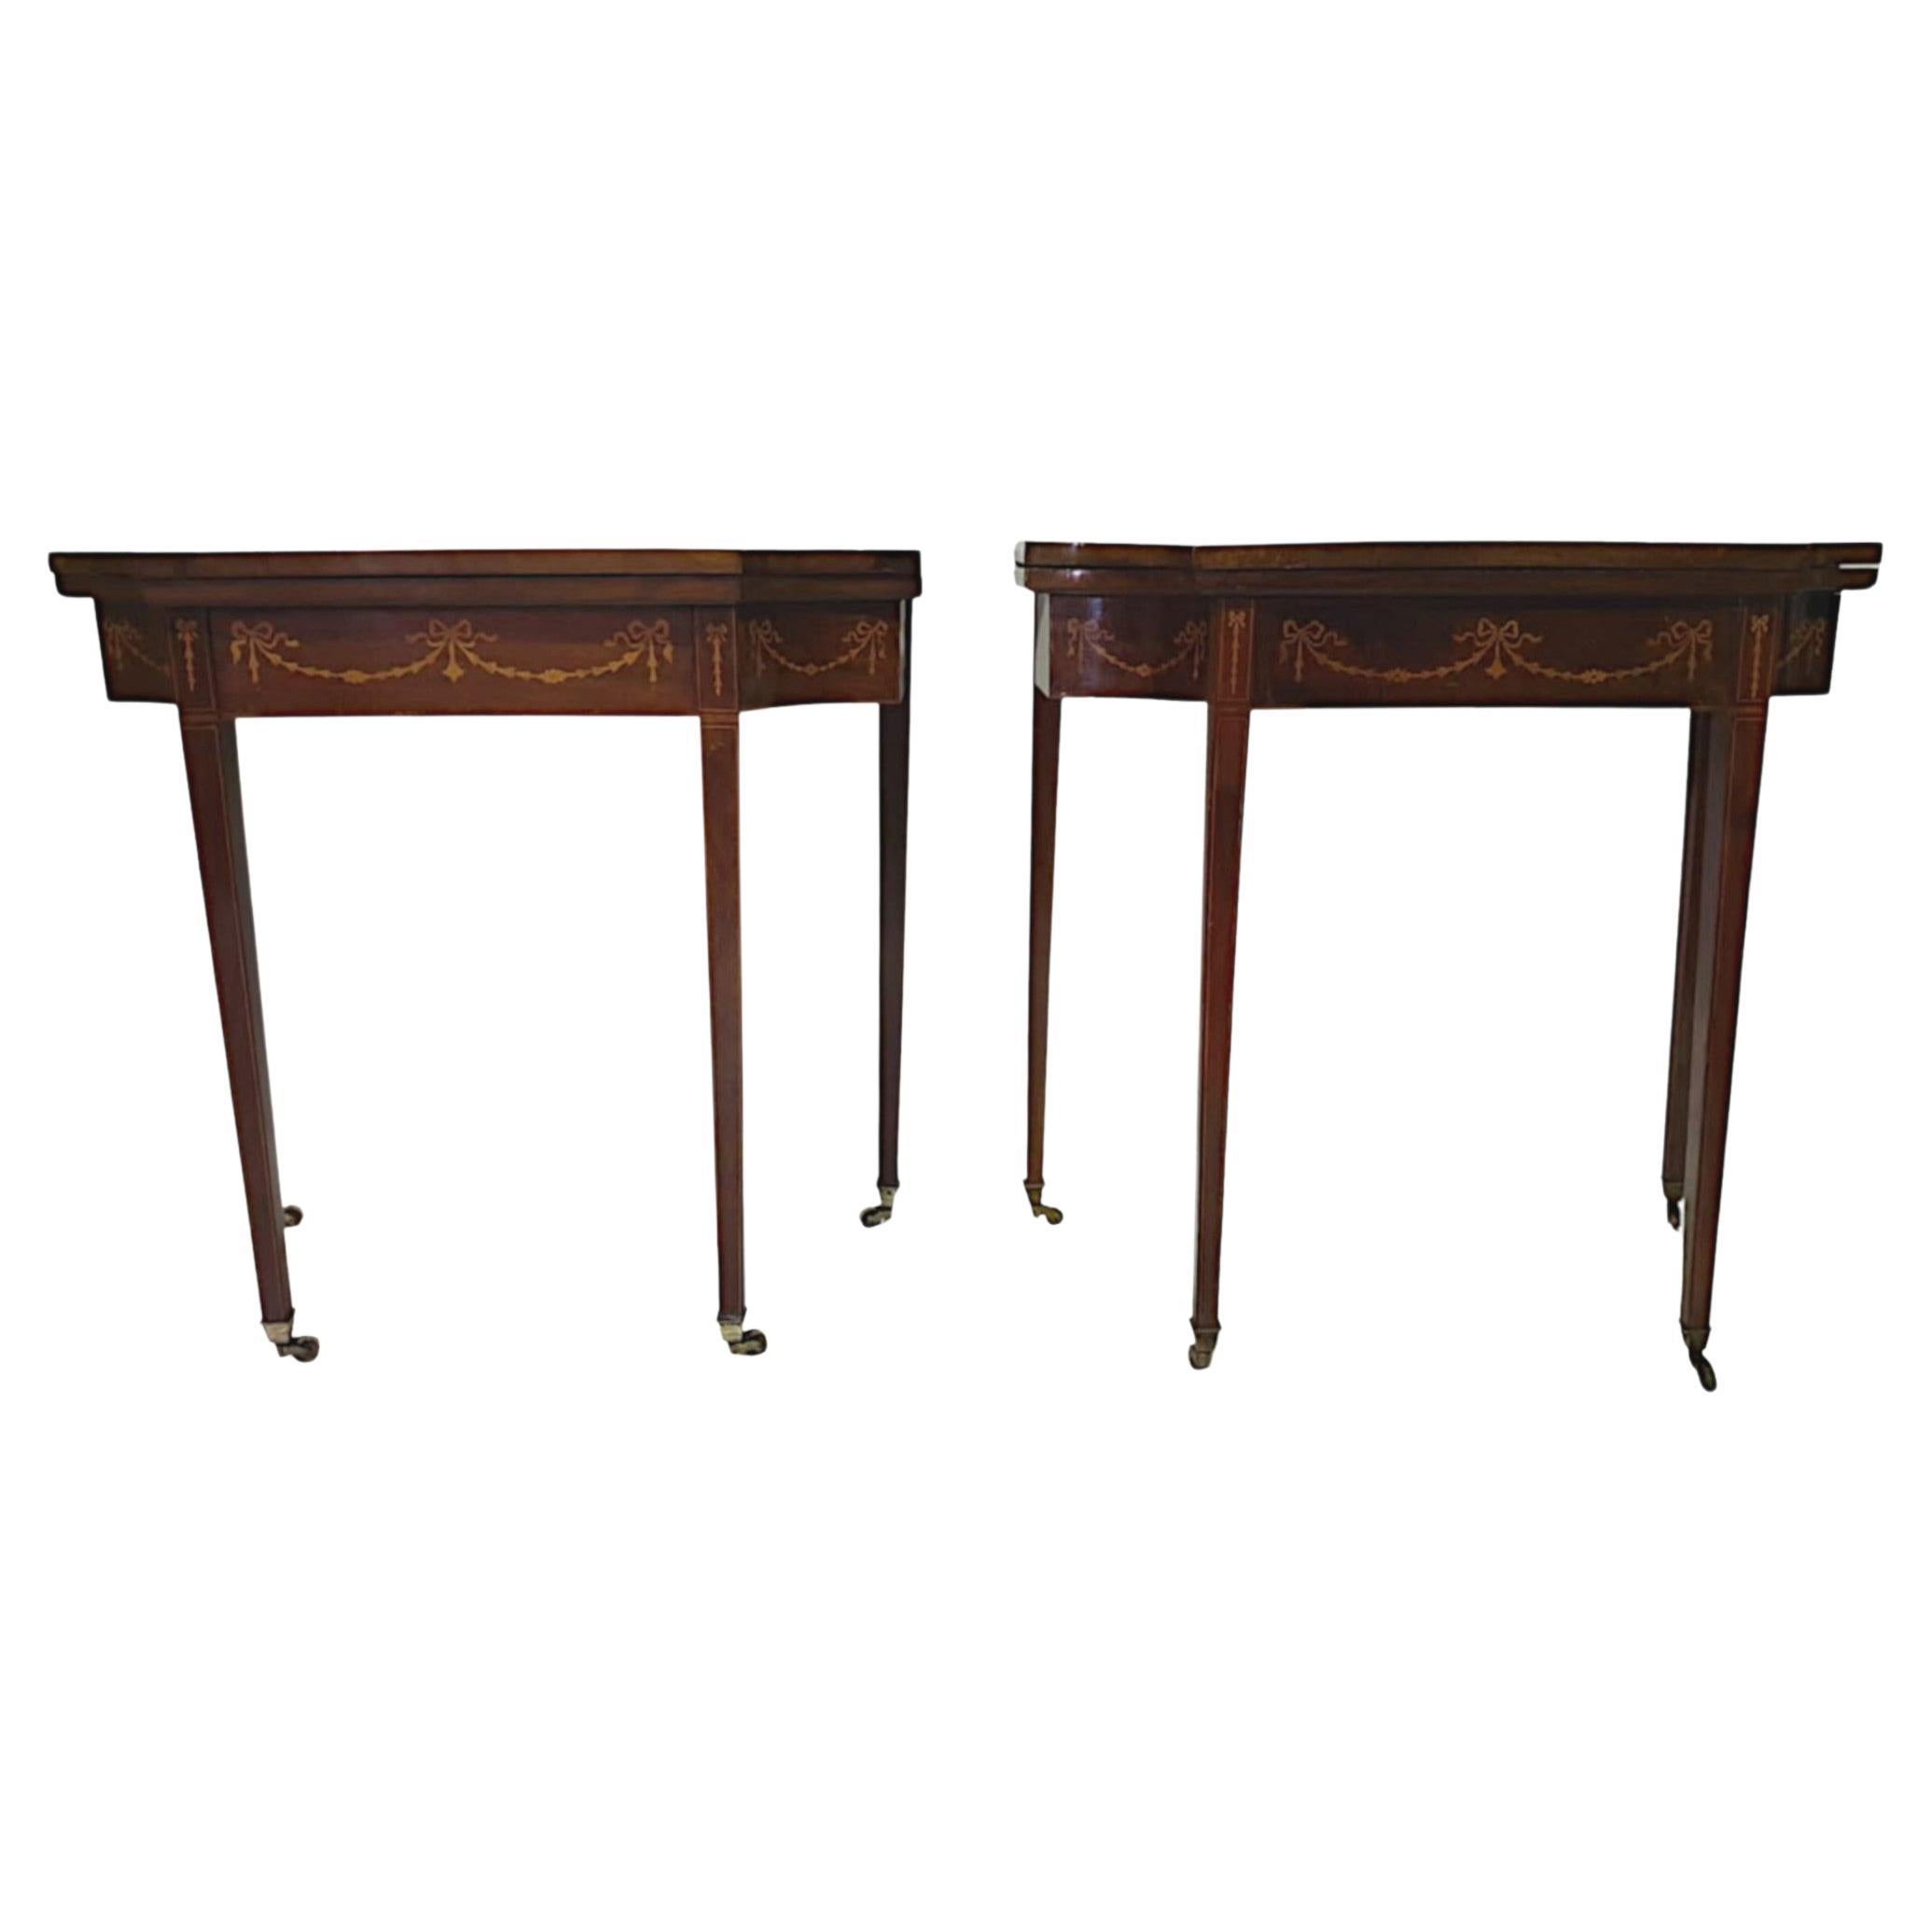 Very Rare and Fine Pair of 19th Century Inlaid Card Tables